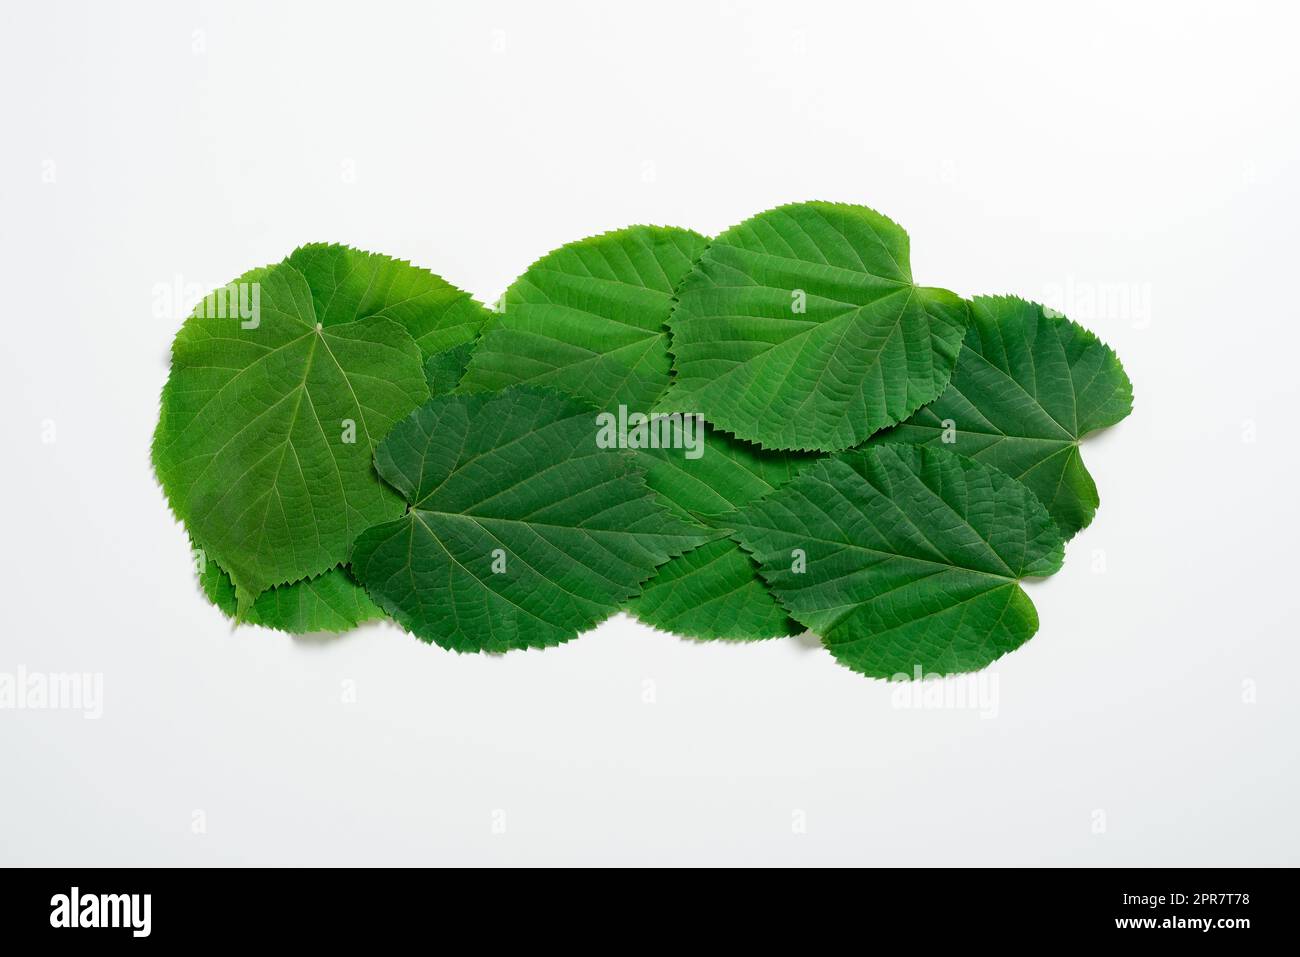 Leaves With Important Messages Written On. One Over Another Leaf With Crutial Informations On. Presented Critical Announcements. Shown Recent Updates. Stock Photo